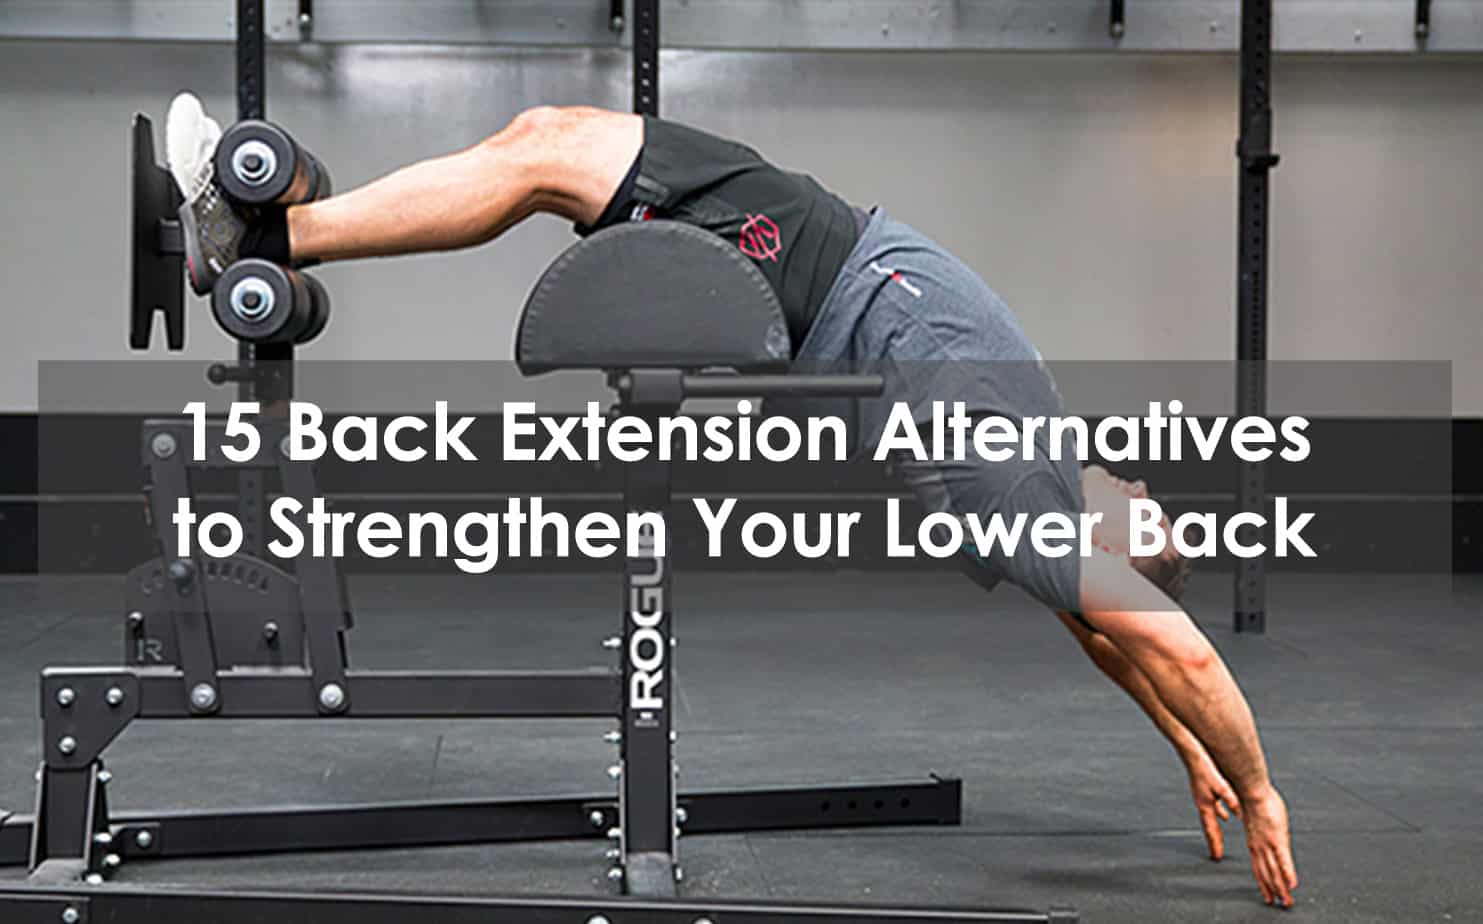 13 Best Back Extension Alternatives (With Pictures)